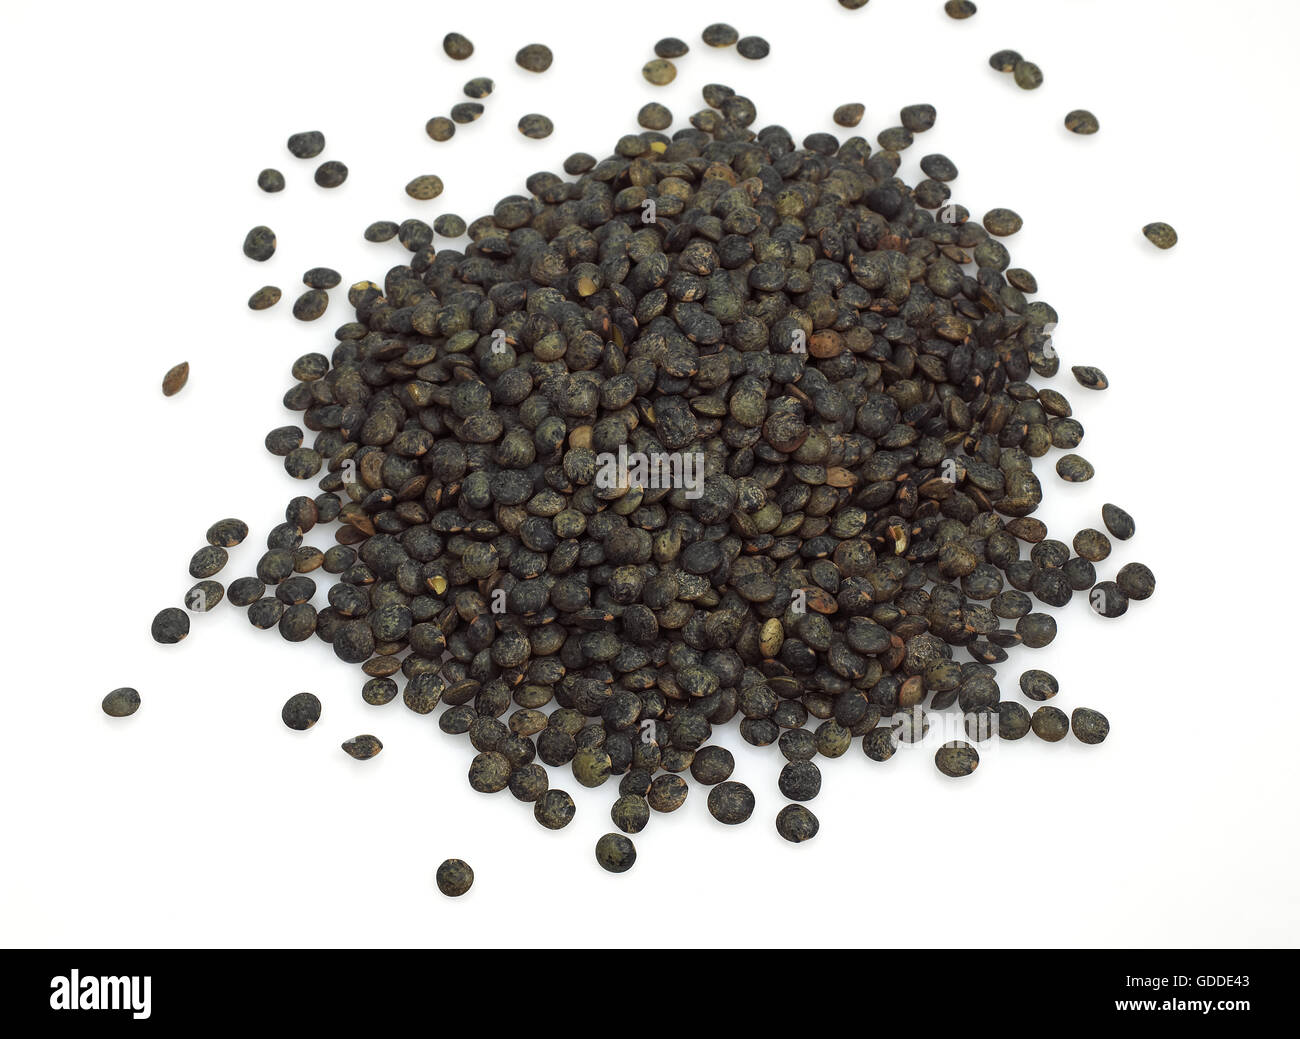 French Lentils called Green Puy Lentils, lens esculenta against White Background Stock Photo